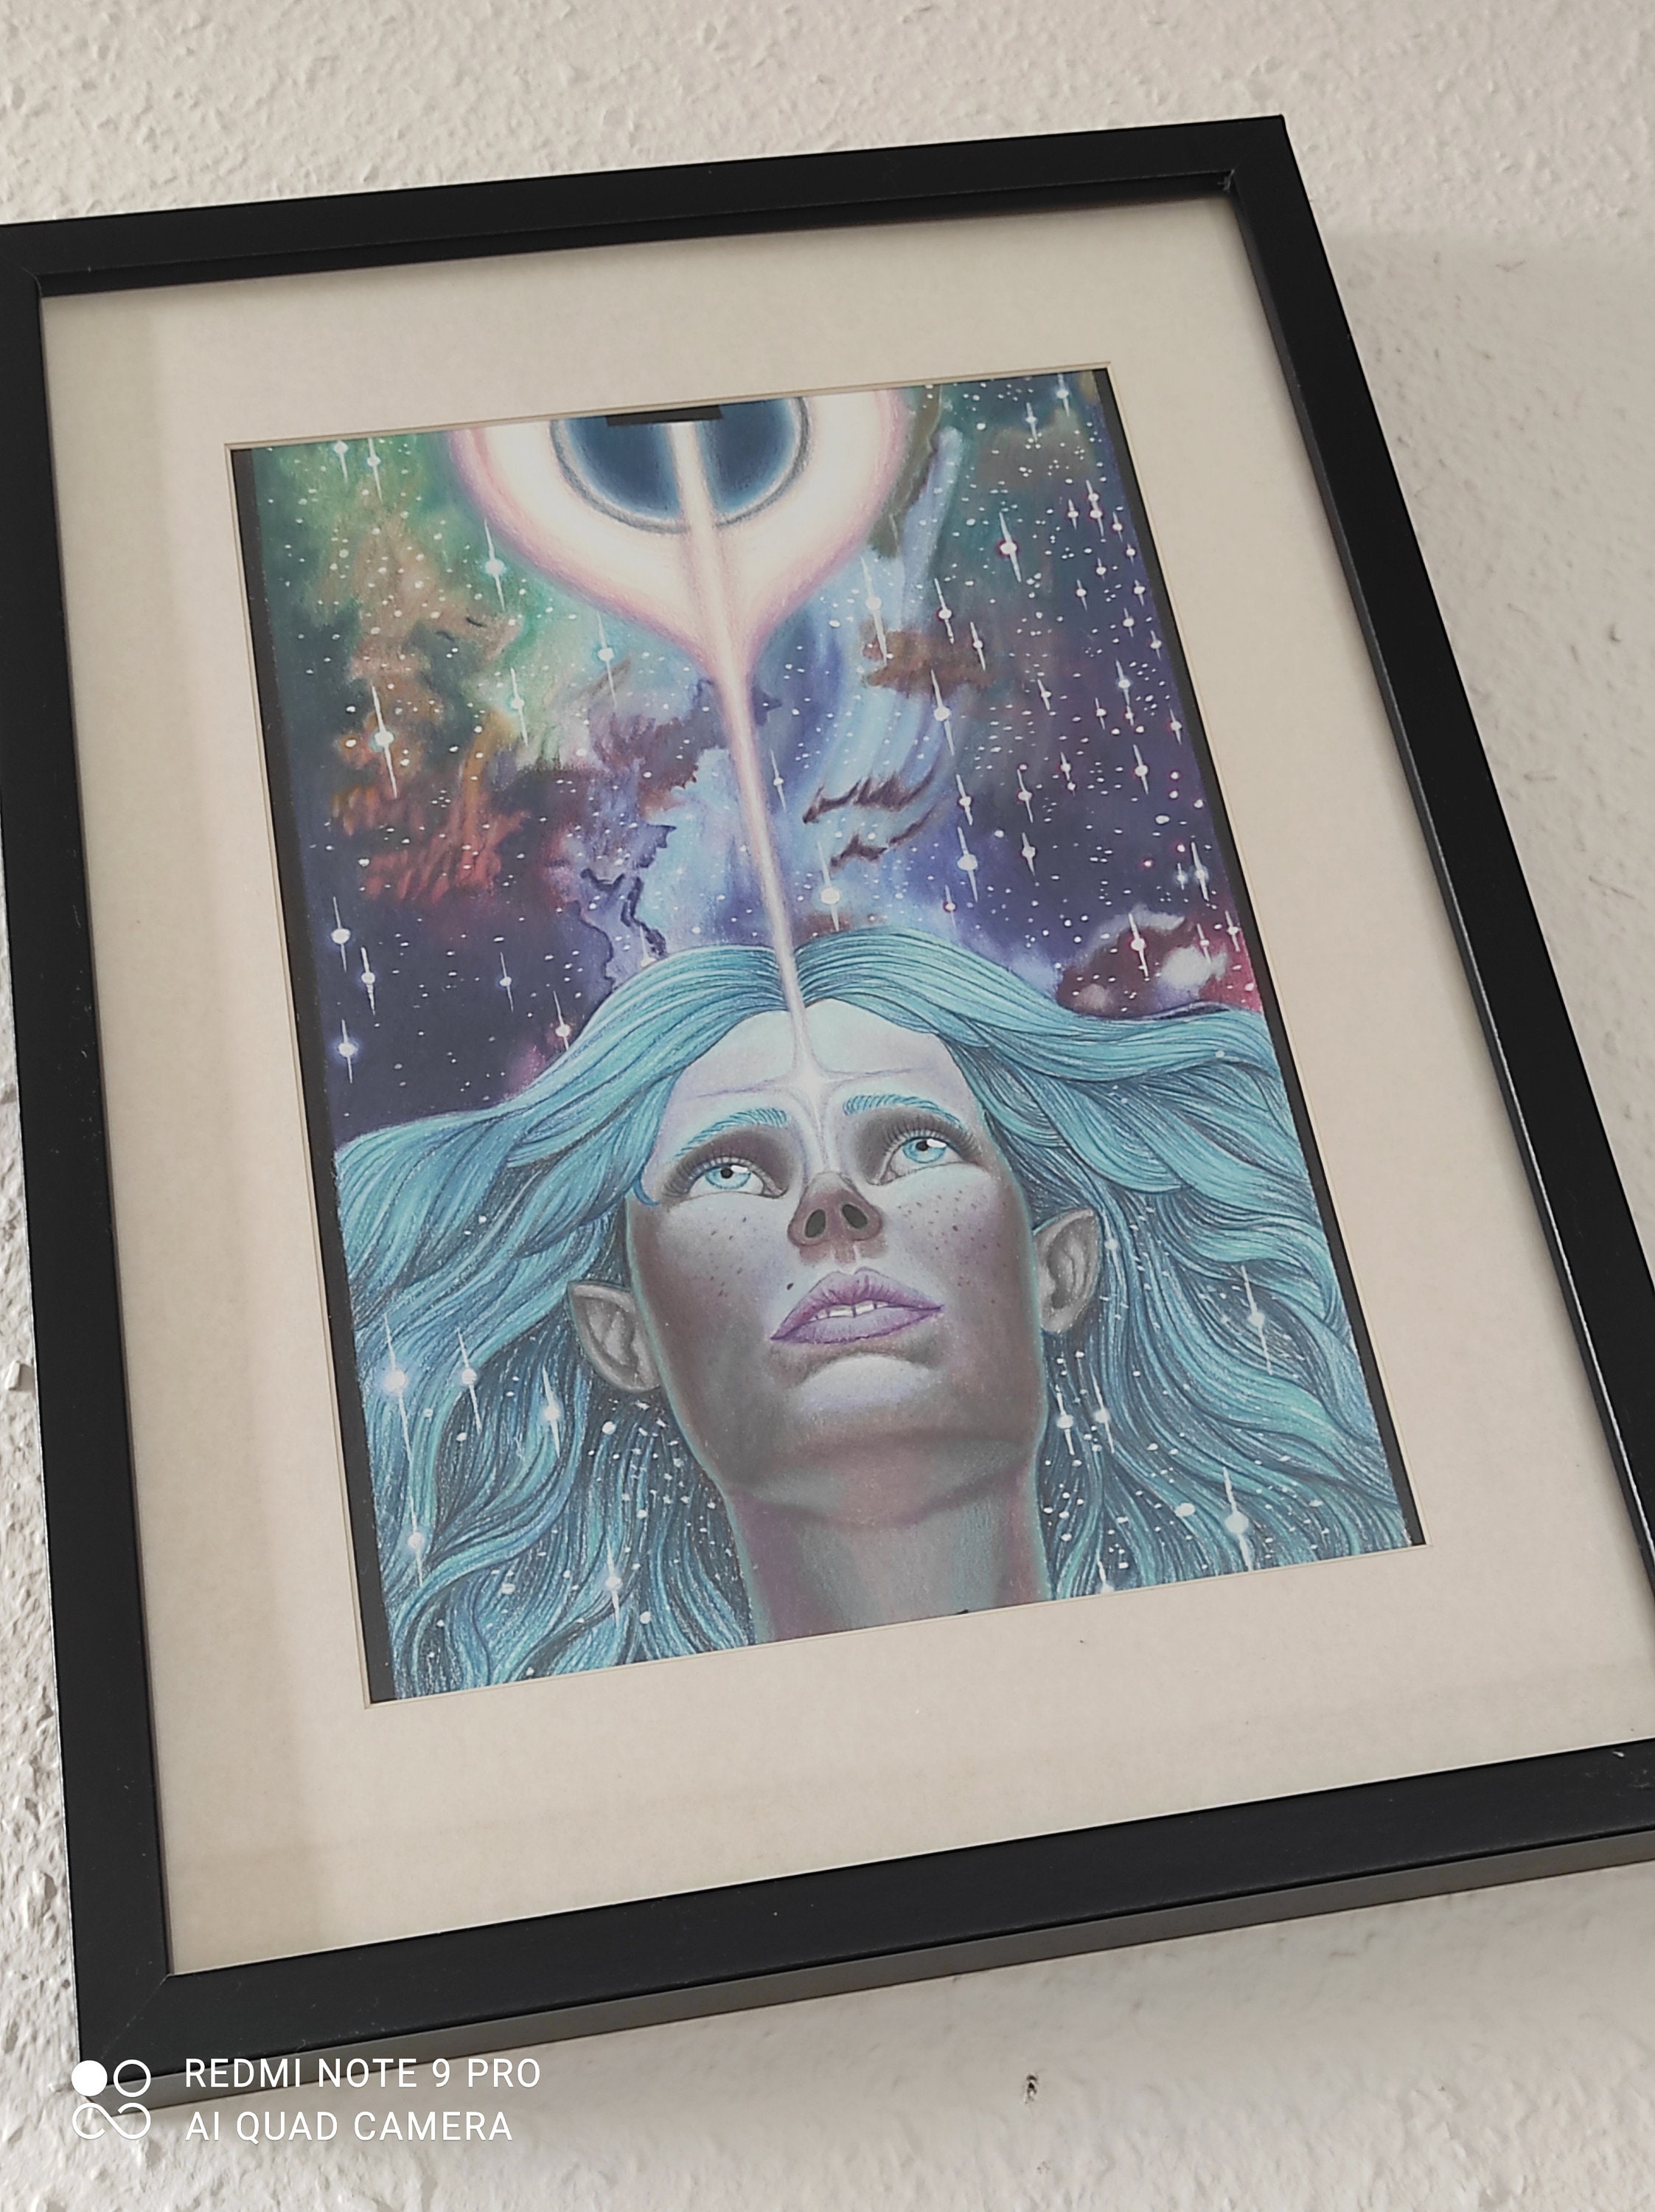 Colored Pencil Fantasy Art - From Sunnyland to Starryverse